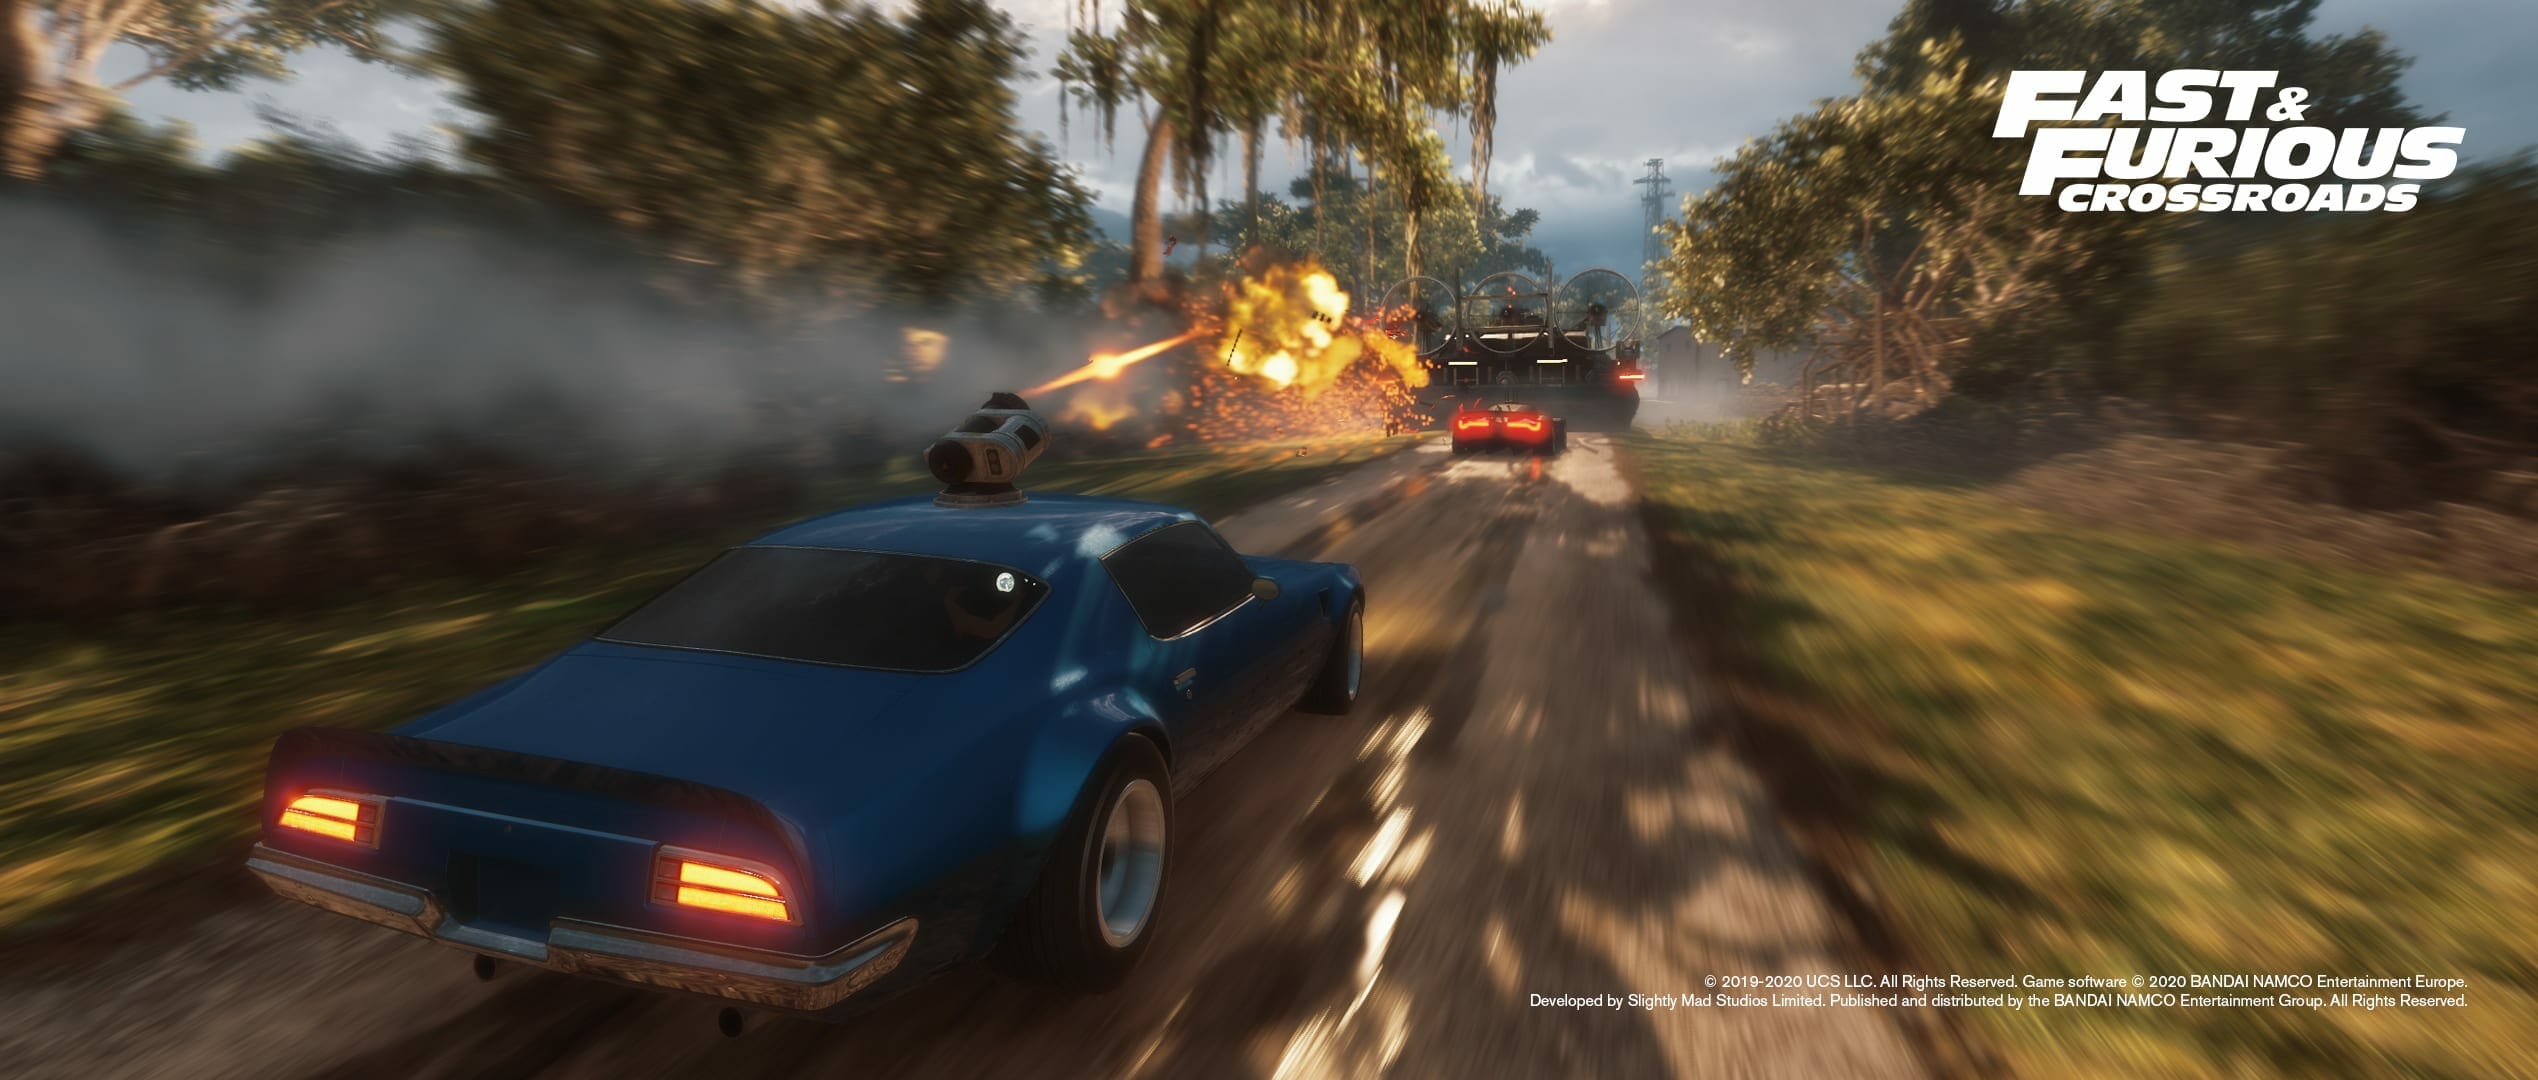 download fast & furious crossroads ps4